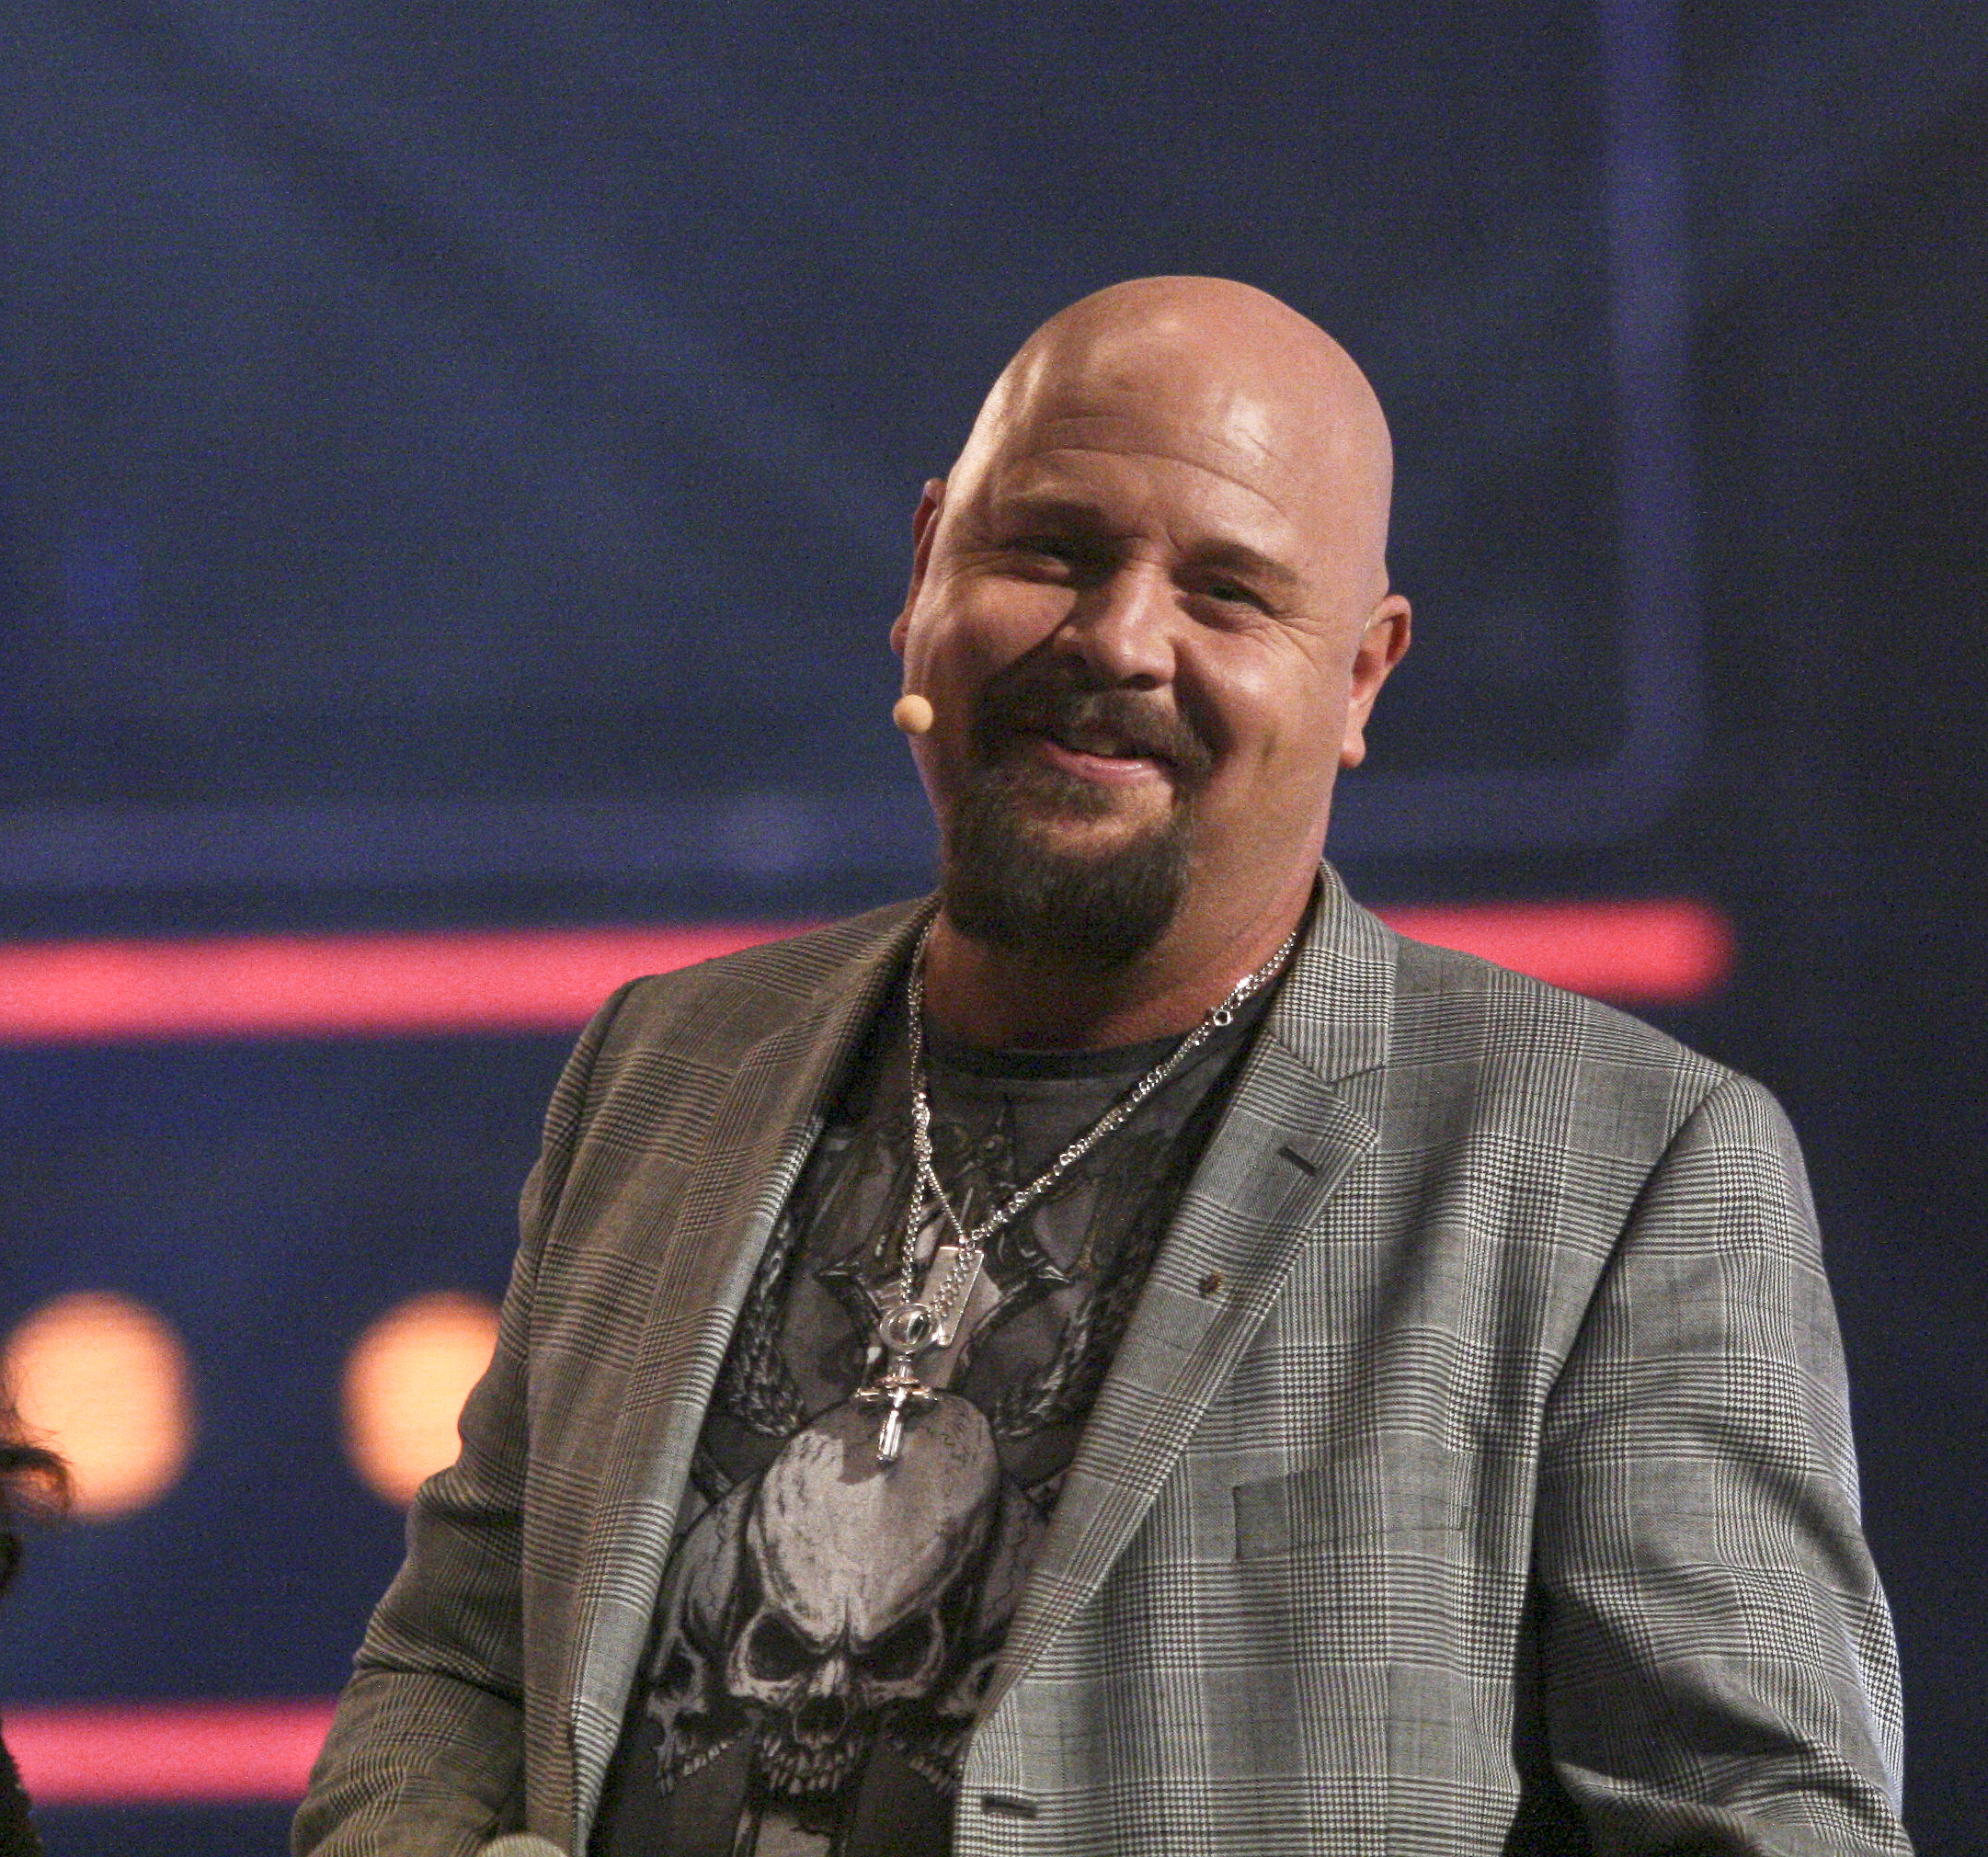 Azerbajdzjan, Anders Bagge, Norge, Eurovision Song Contest